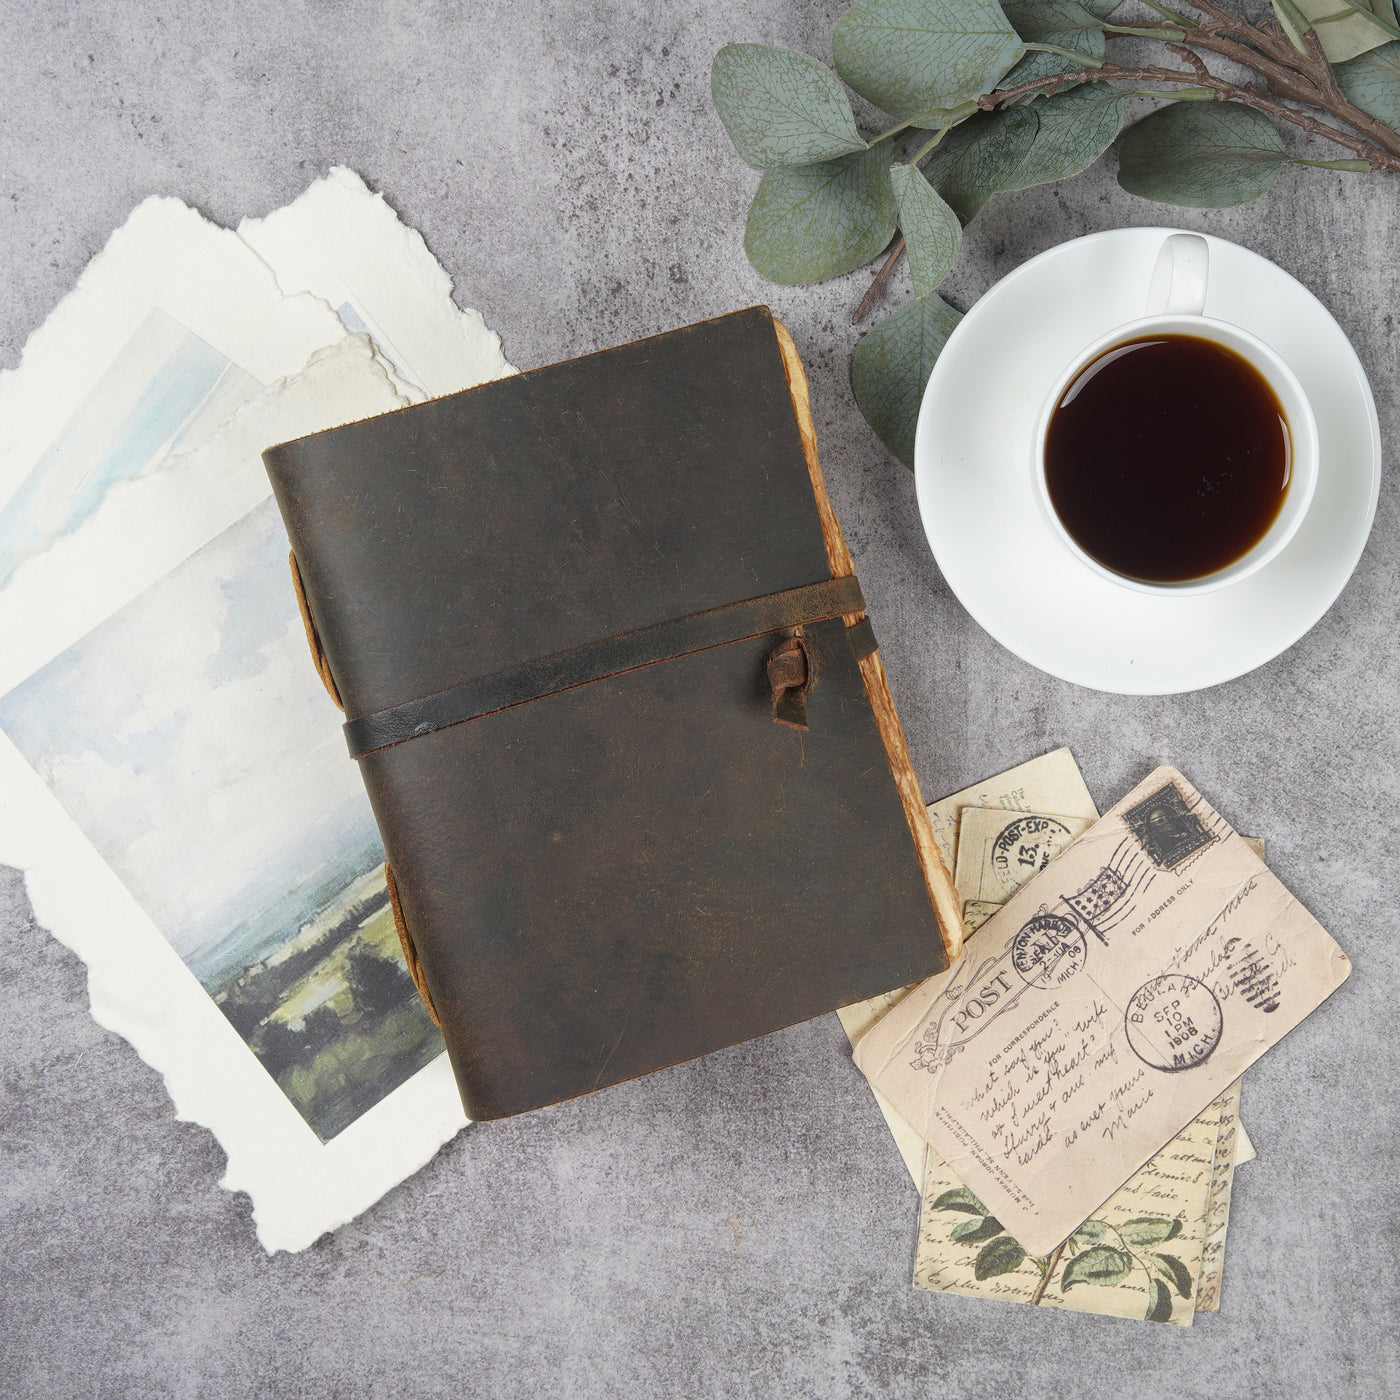 BROWN LEATHER BOUND JOURNAL - DECKLE EDGE WATERCOLOR PAPER – Leather Village